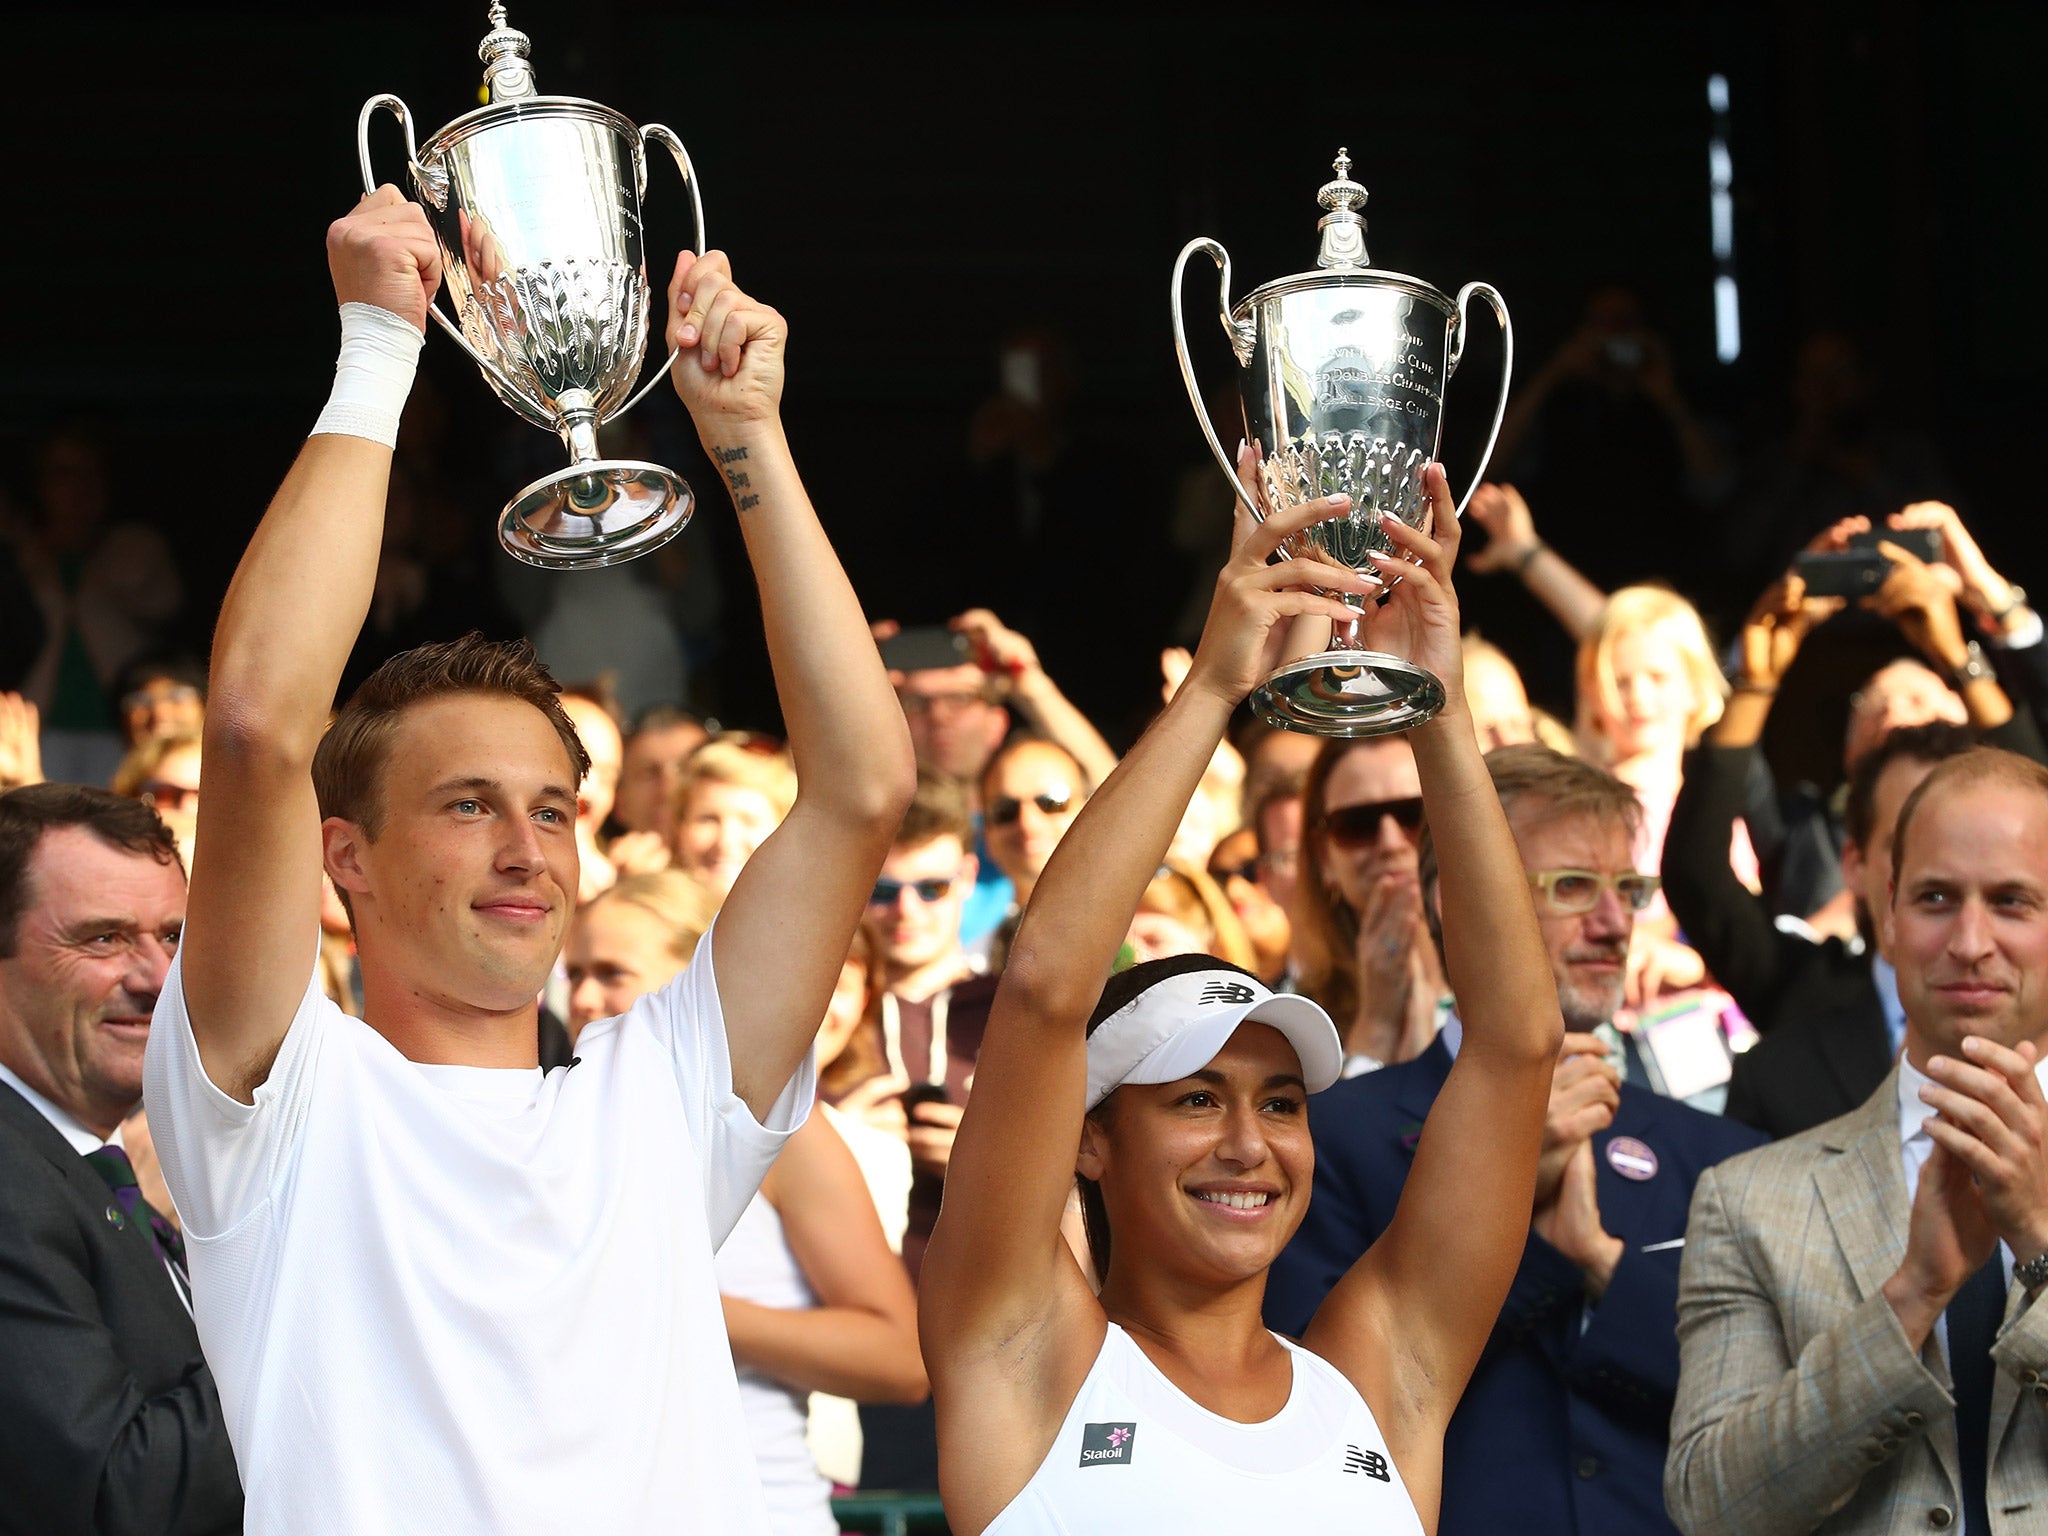 Kontinen and Watson lift their trophies after winning the mixed doubles